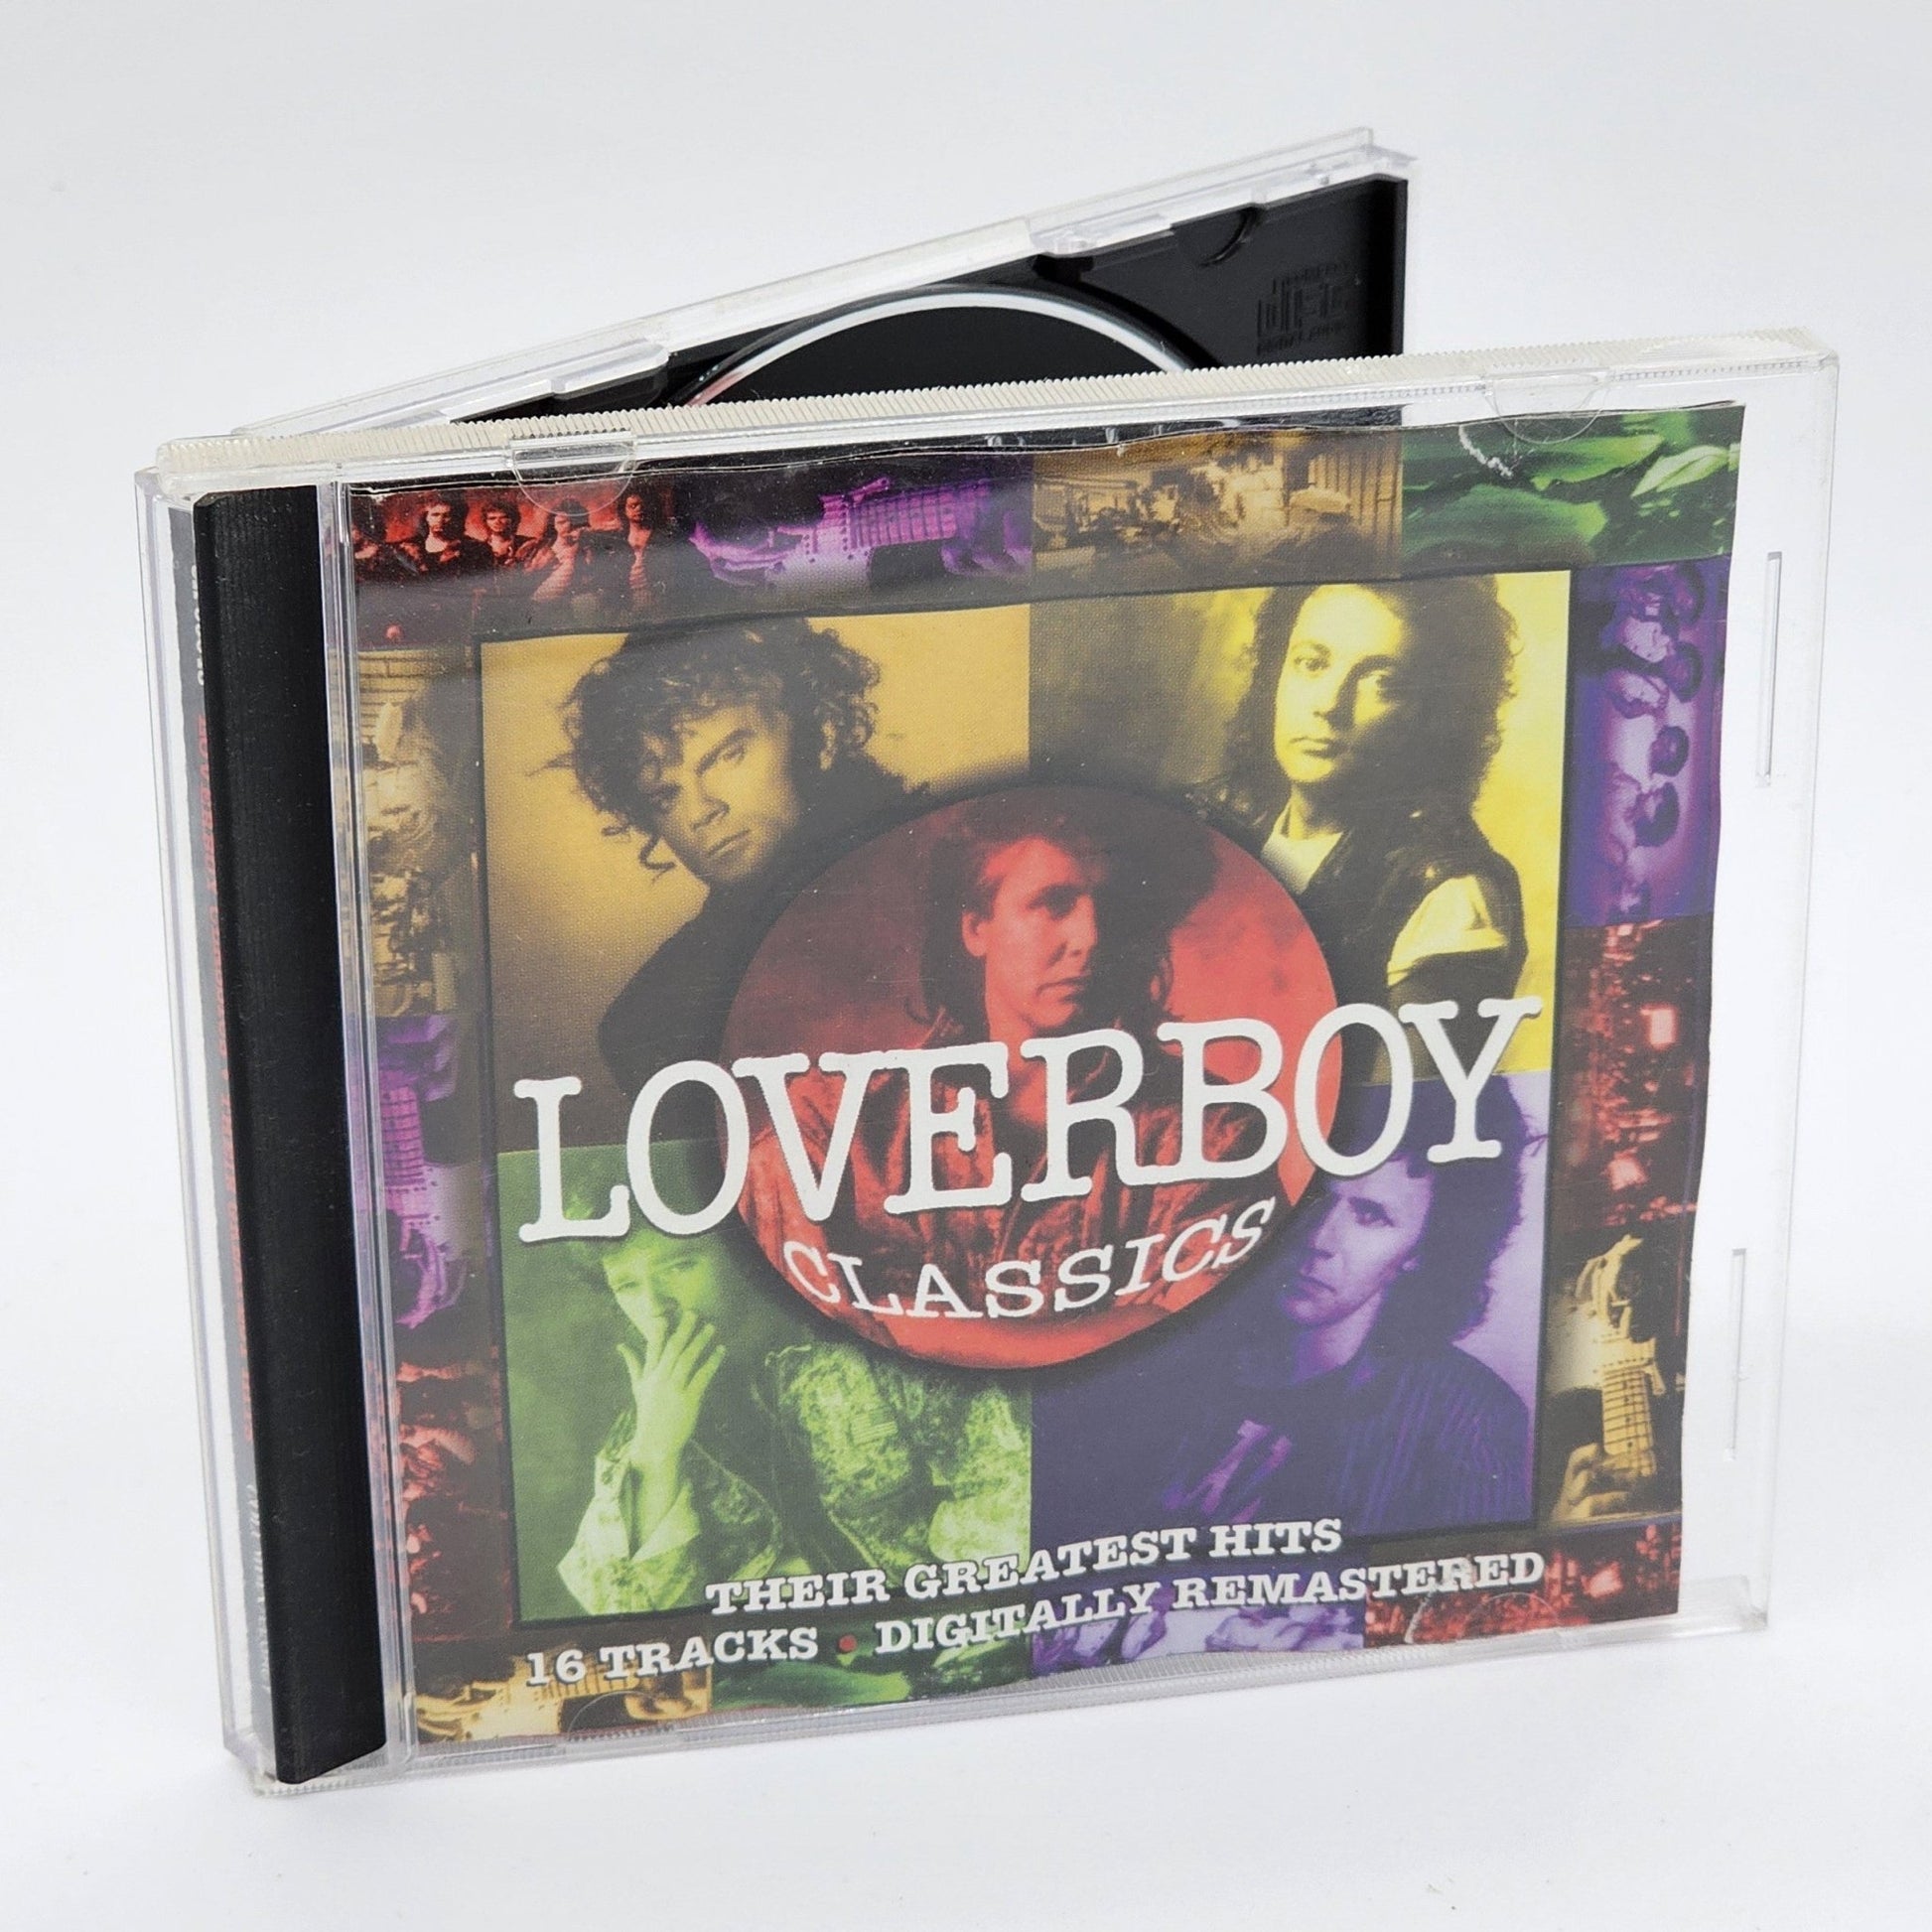 Columbia Records - Loverboy | Classics Their Greatest Hits 16 Tracks Digitally Remastered | CD - Compact Disc - Steady Bunny Shop